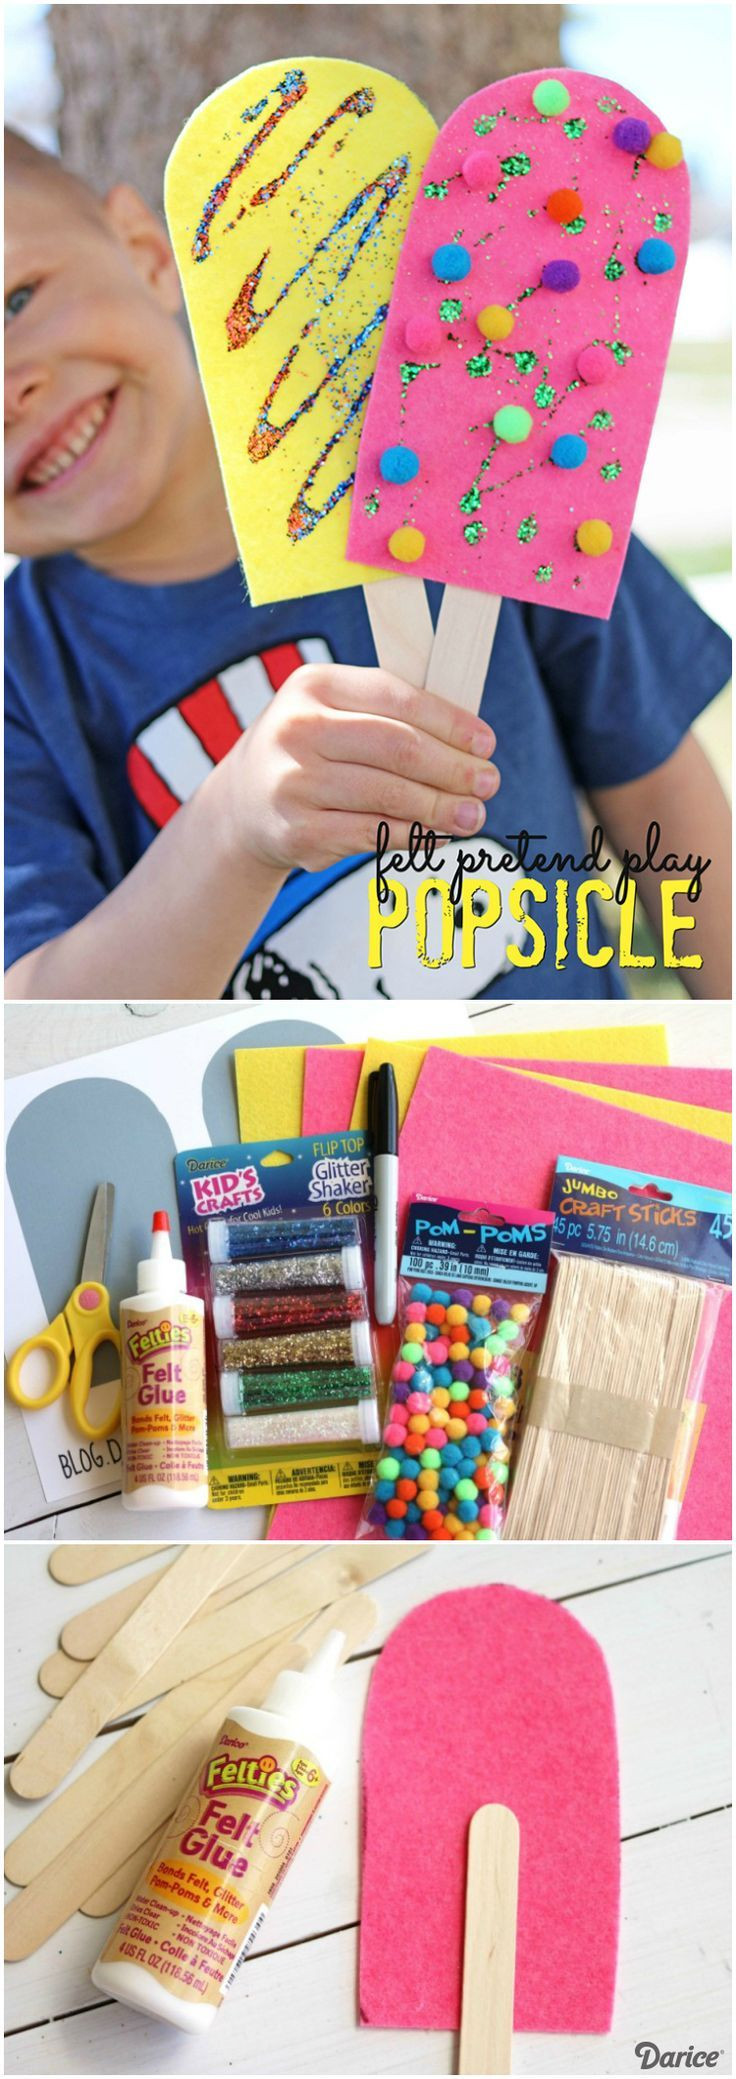 Summer Craft Ideas For Preschoolers
 Popsicle Craft for Pretend Play Darice